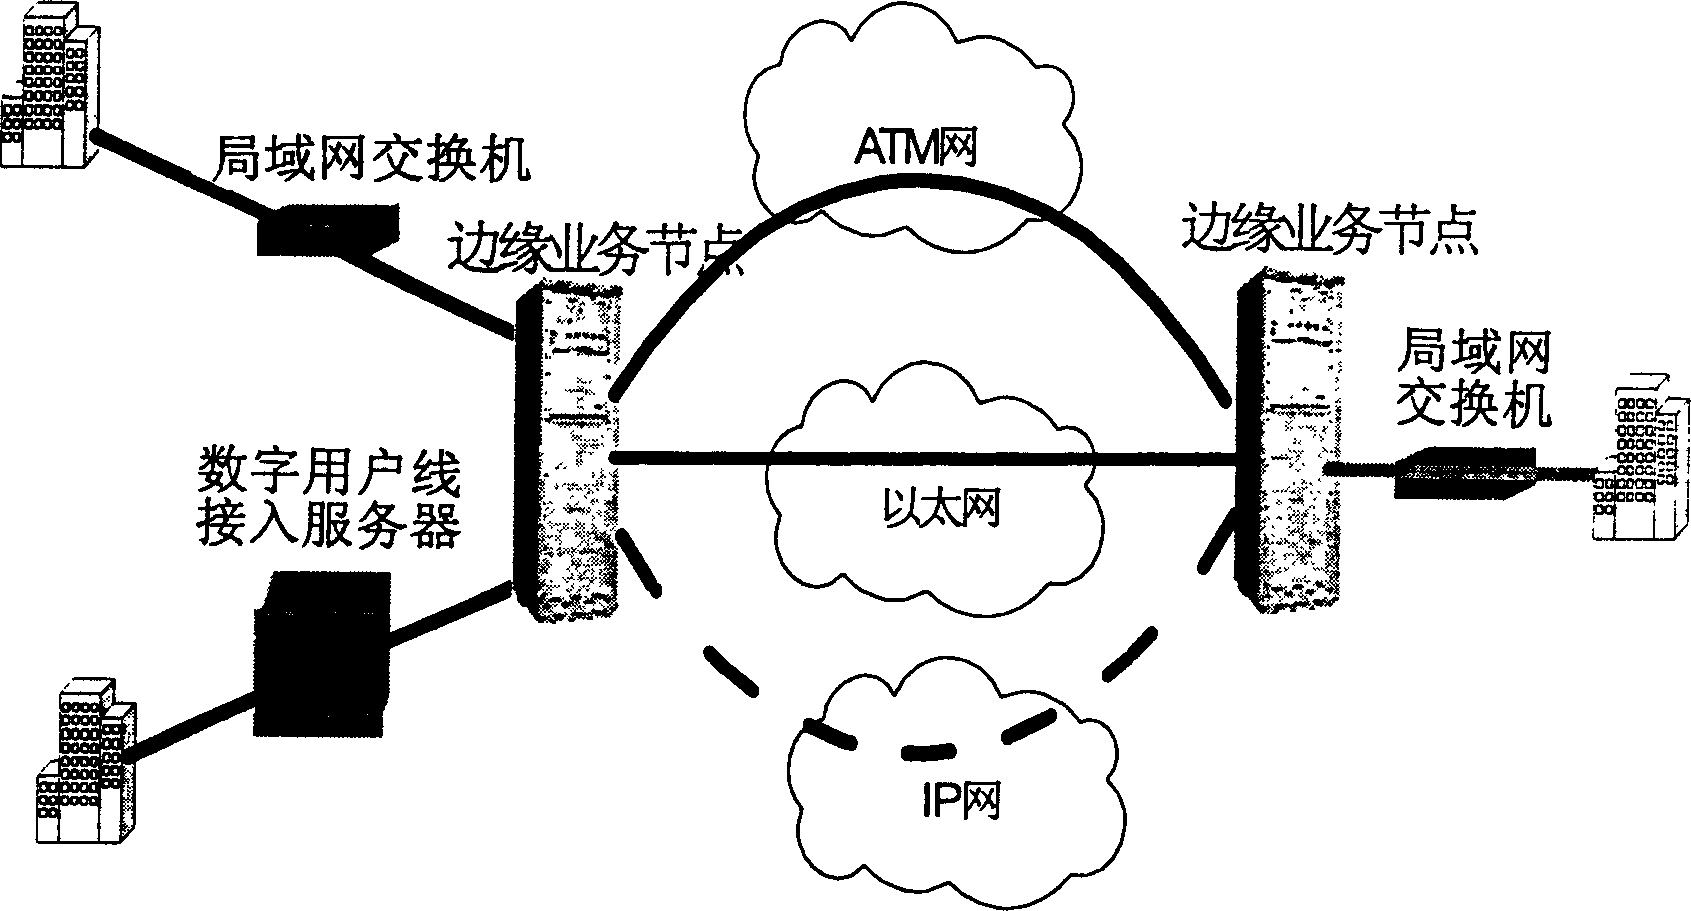 Method for access of IP public net of virtual exchanger system